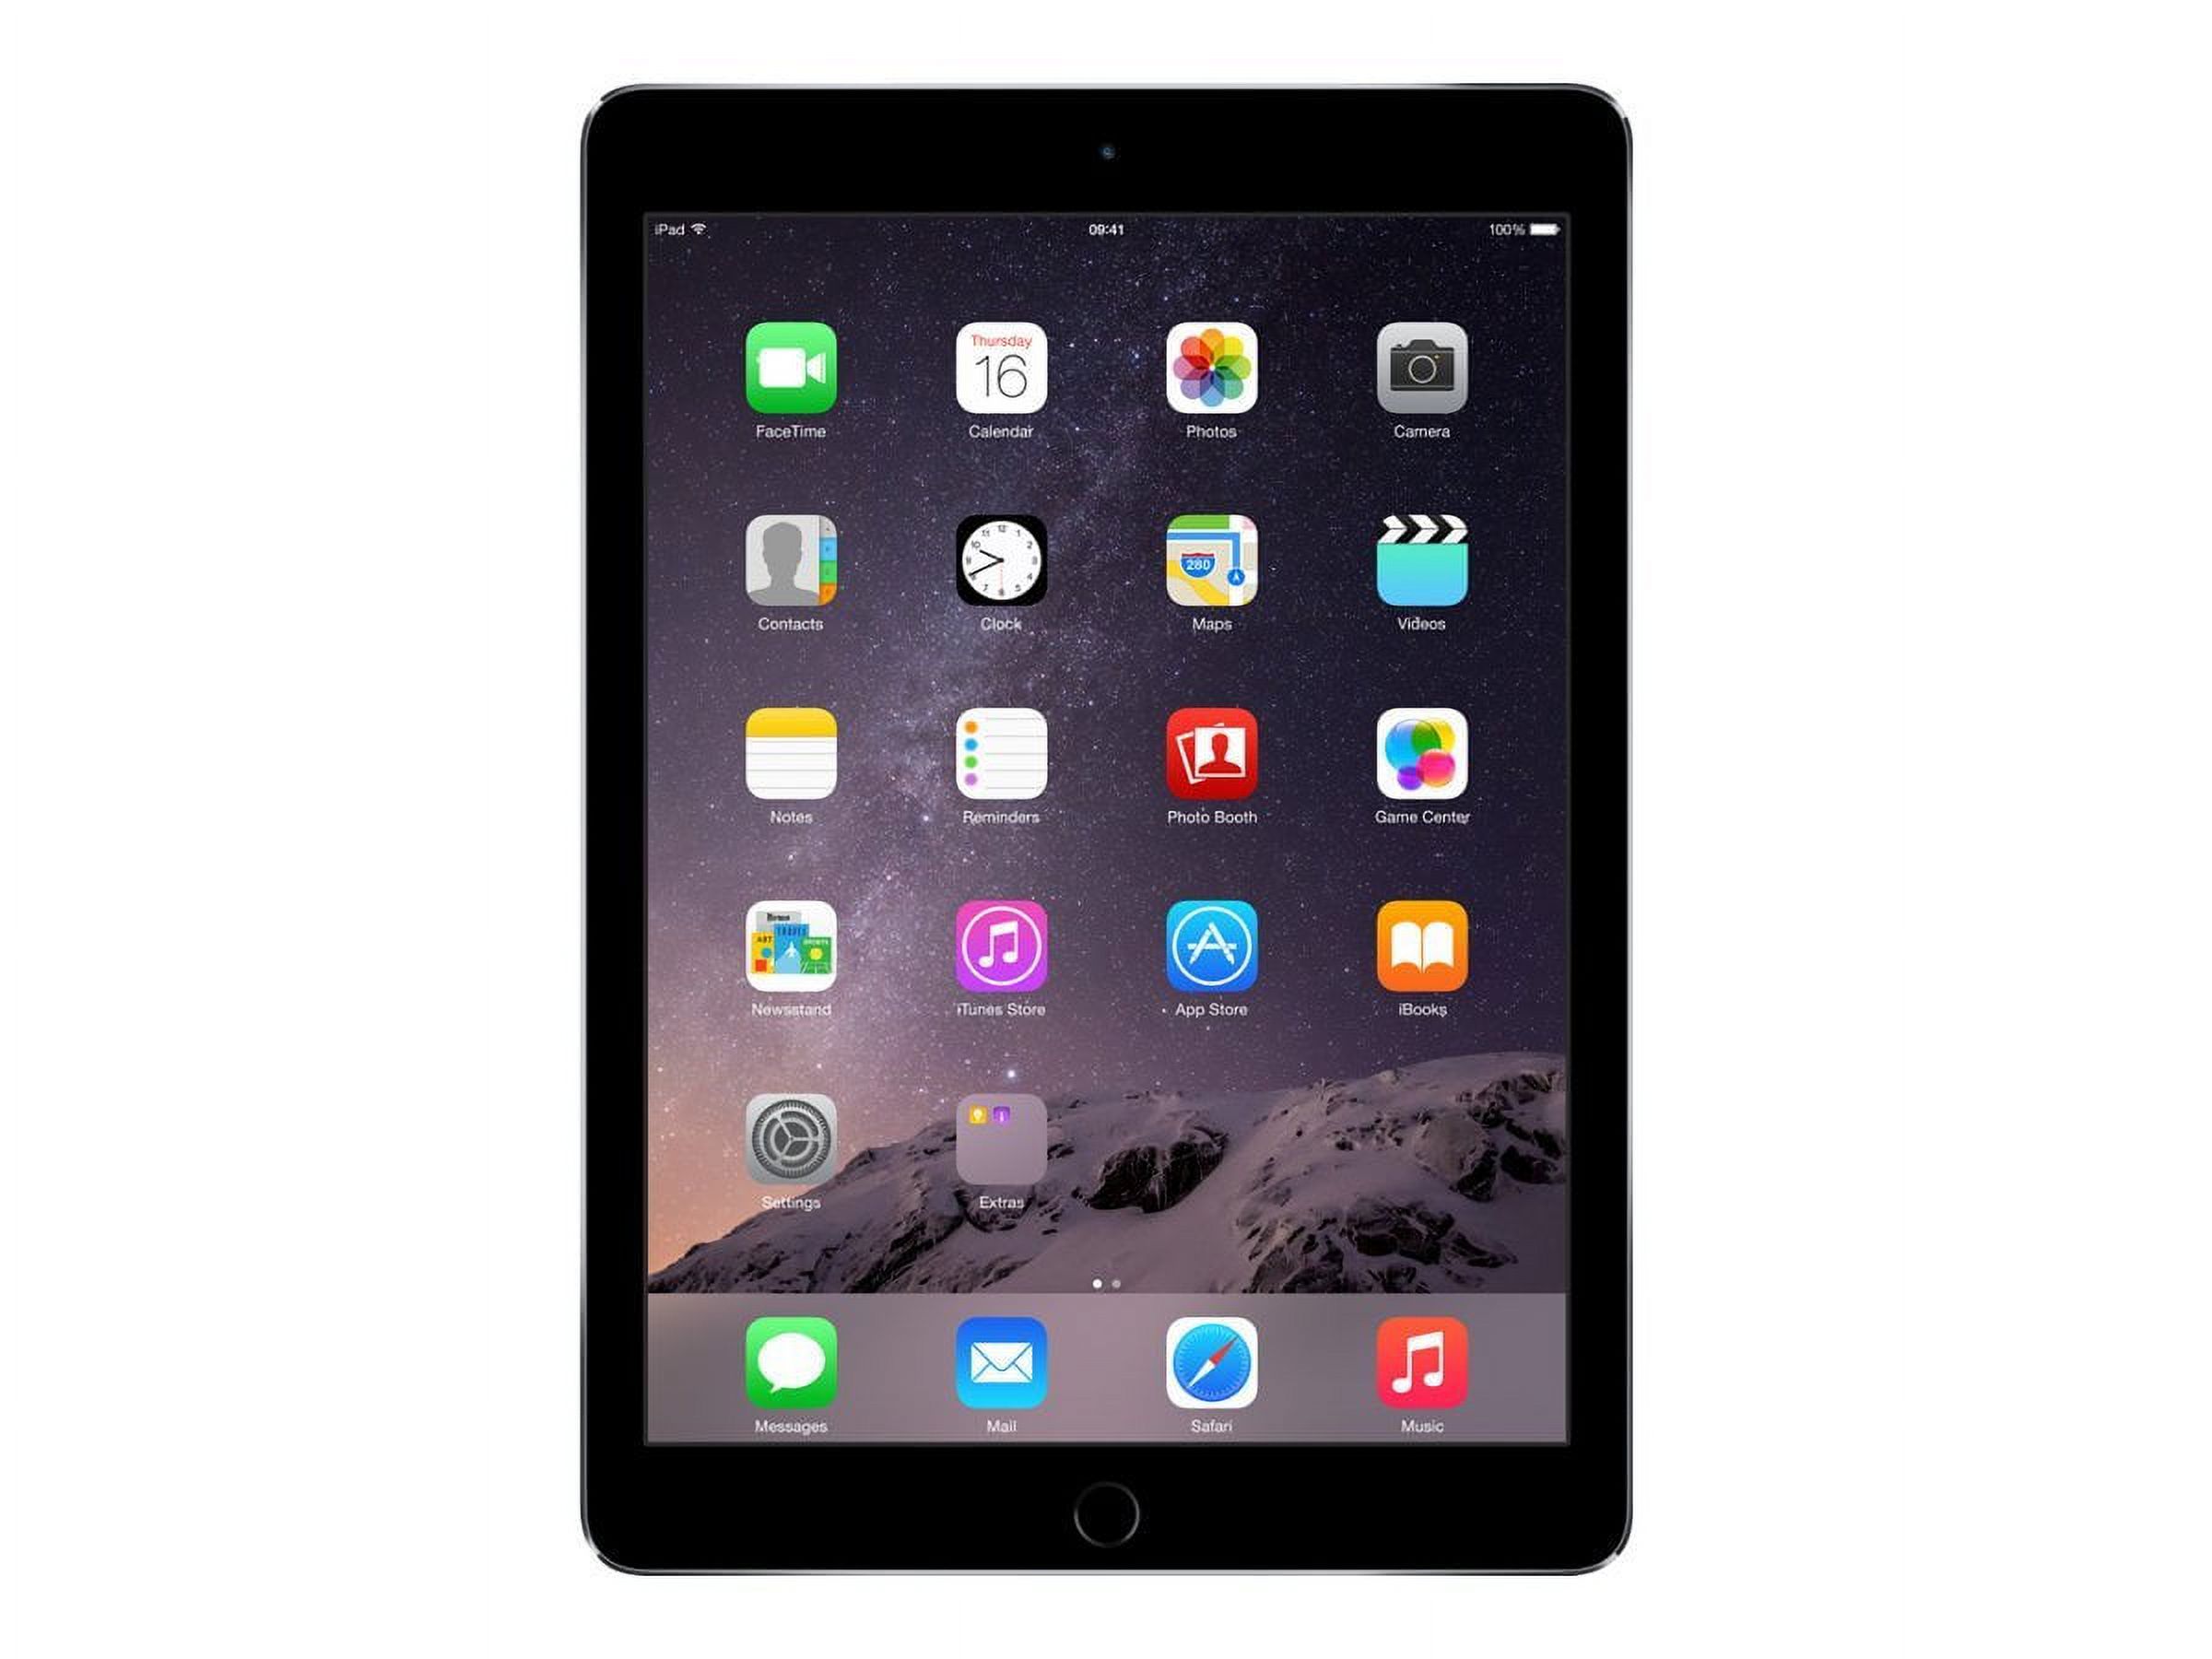 Restored Apple iPad Air 2 64GB, Wi-Fi, 9.7" - Space Gray - (MGKL2LL/A) (Refurbished) - image 1 of 4